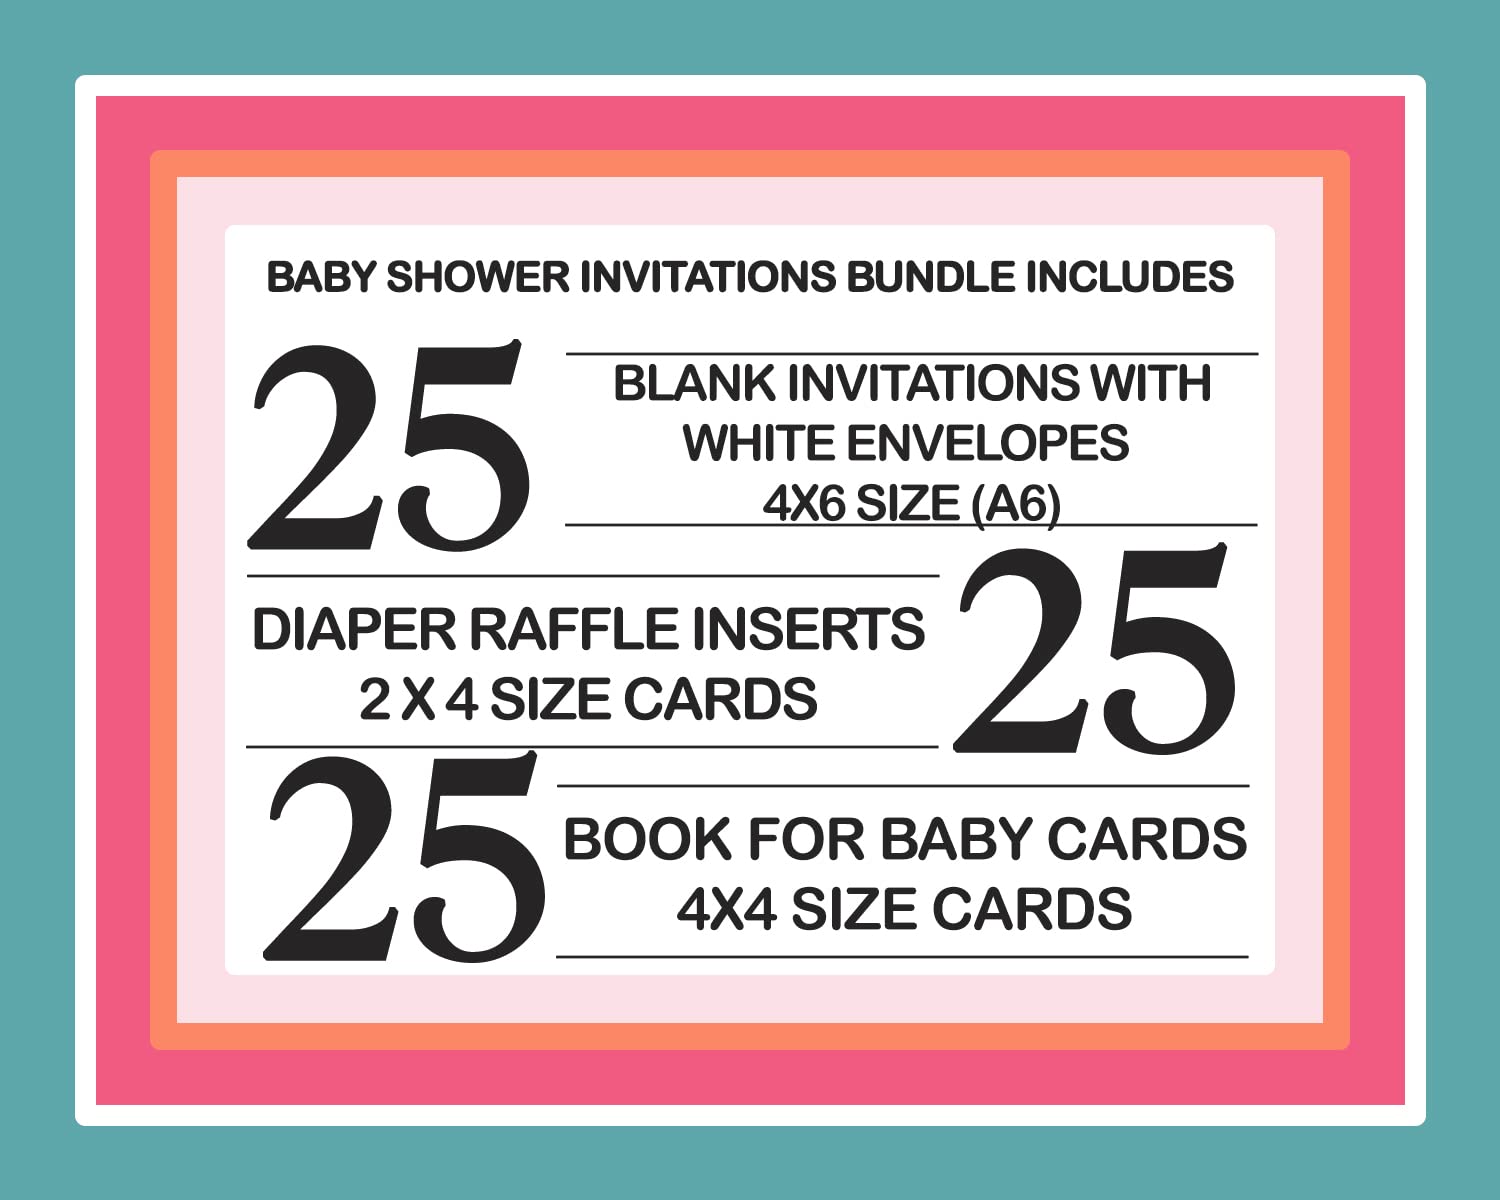 Twinkle Little Star Baby Shower Invitation Bundle (25 Guests) Pack Includes Blank Invites with Envelopes for Girls, Diaper Raffle Insert and Bring a Book Cards Set – Pink and Gold Theme Celestial